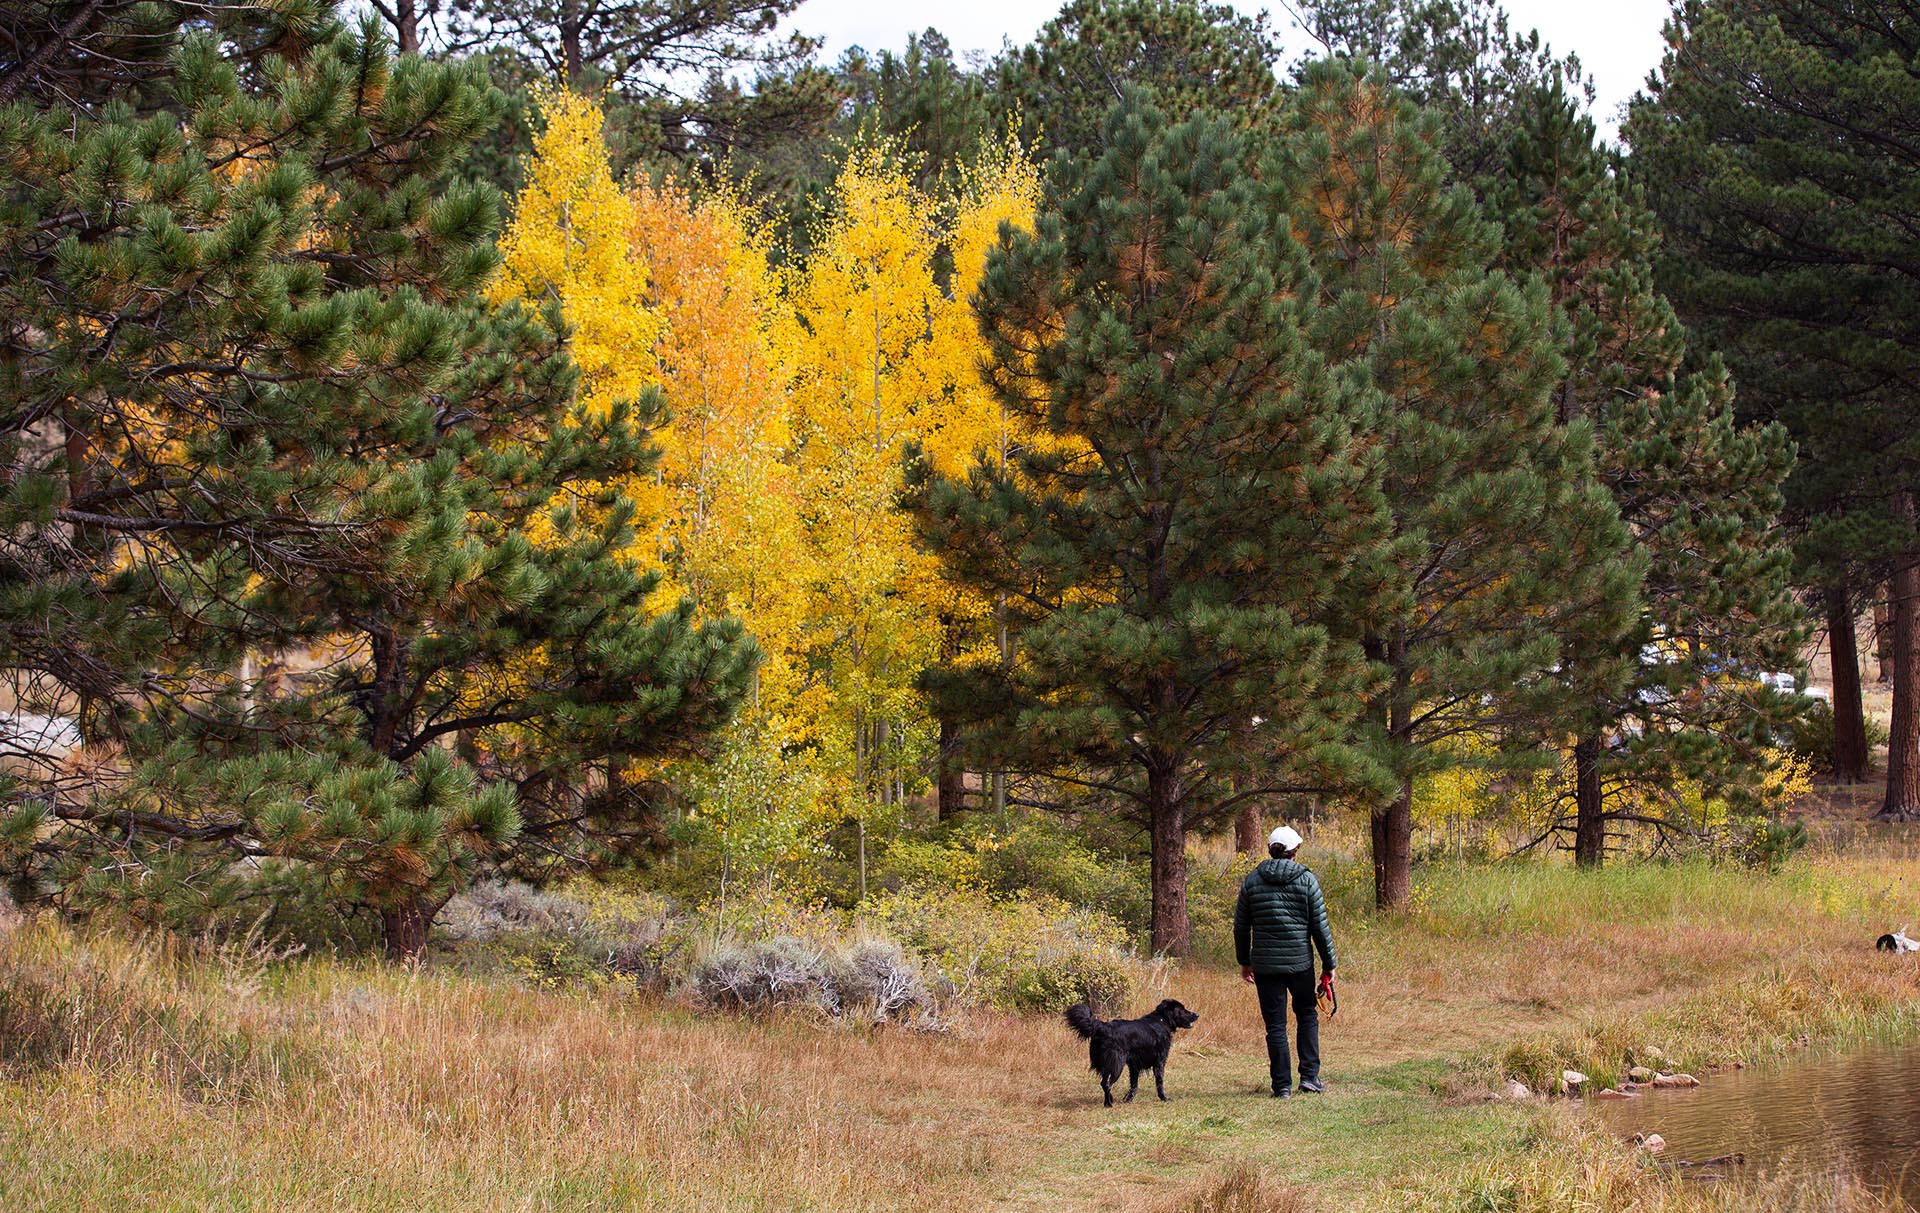 Hiker and dog on trail in autumn